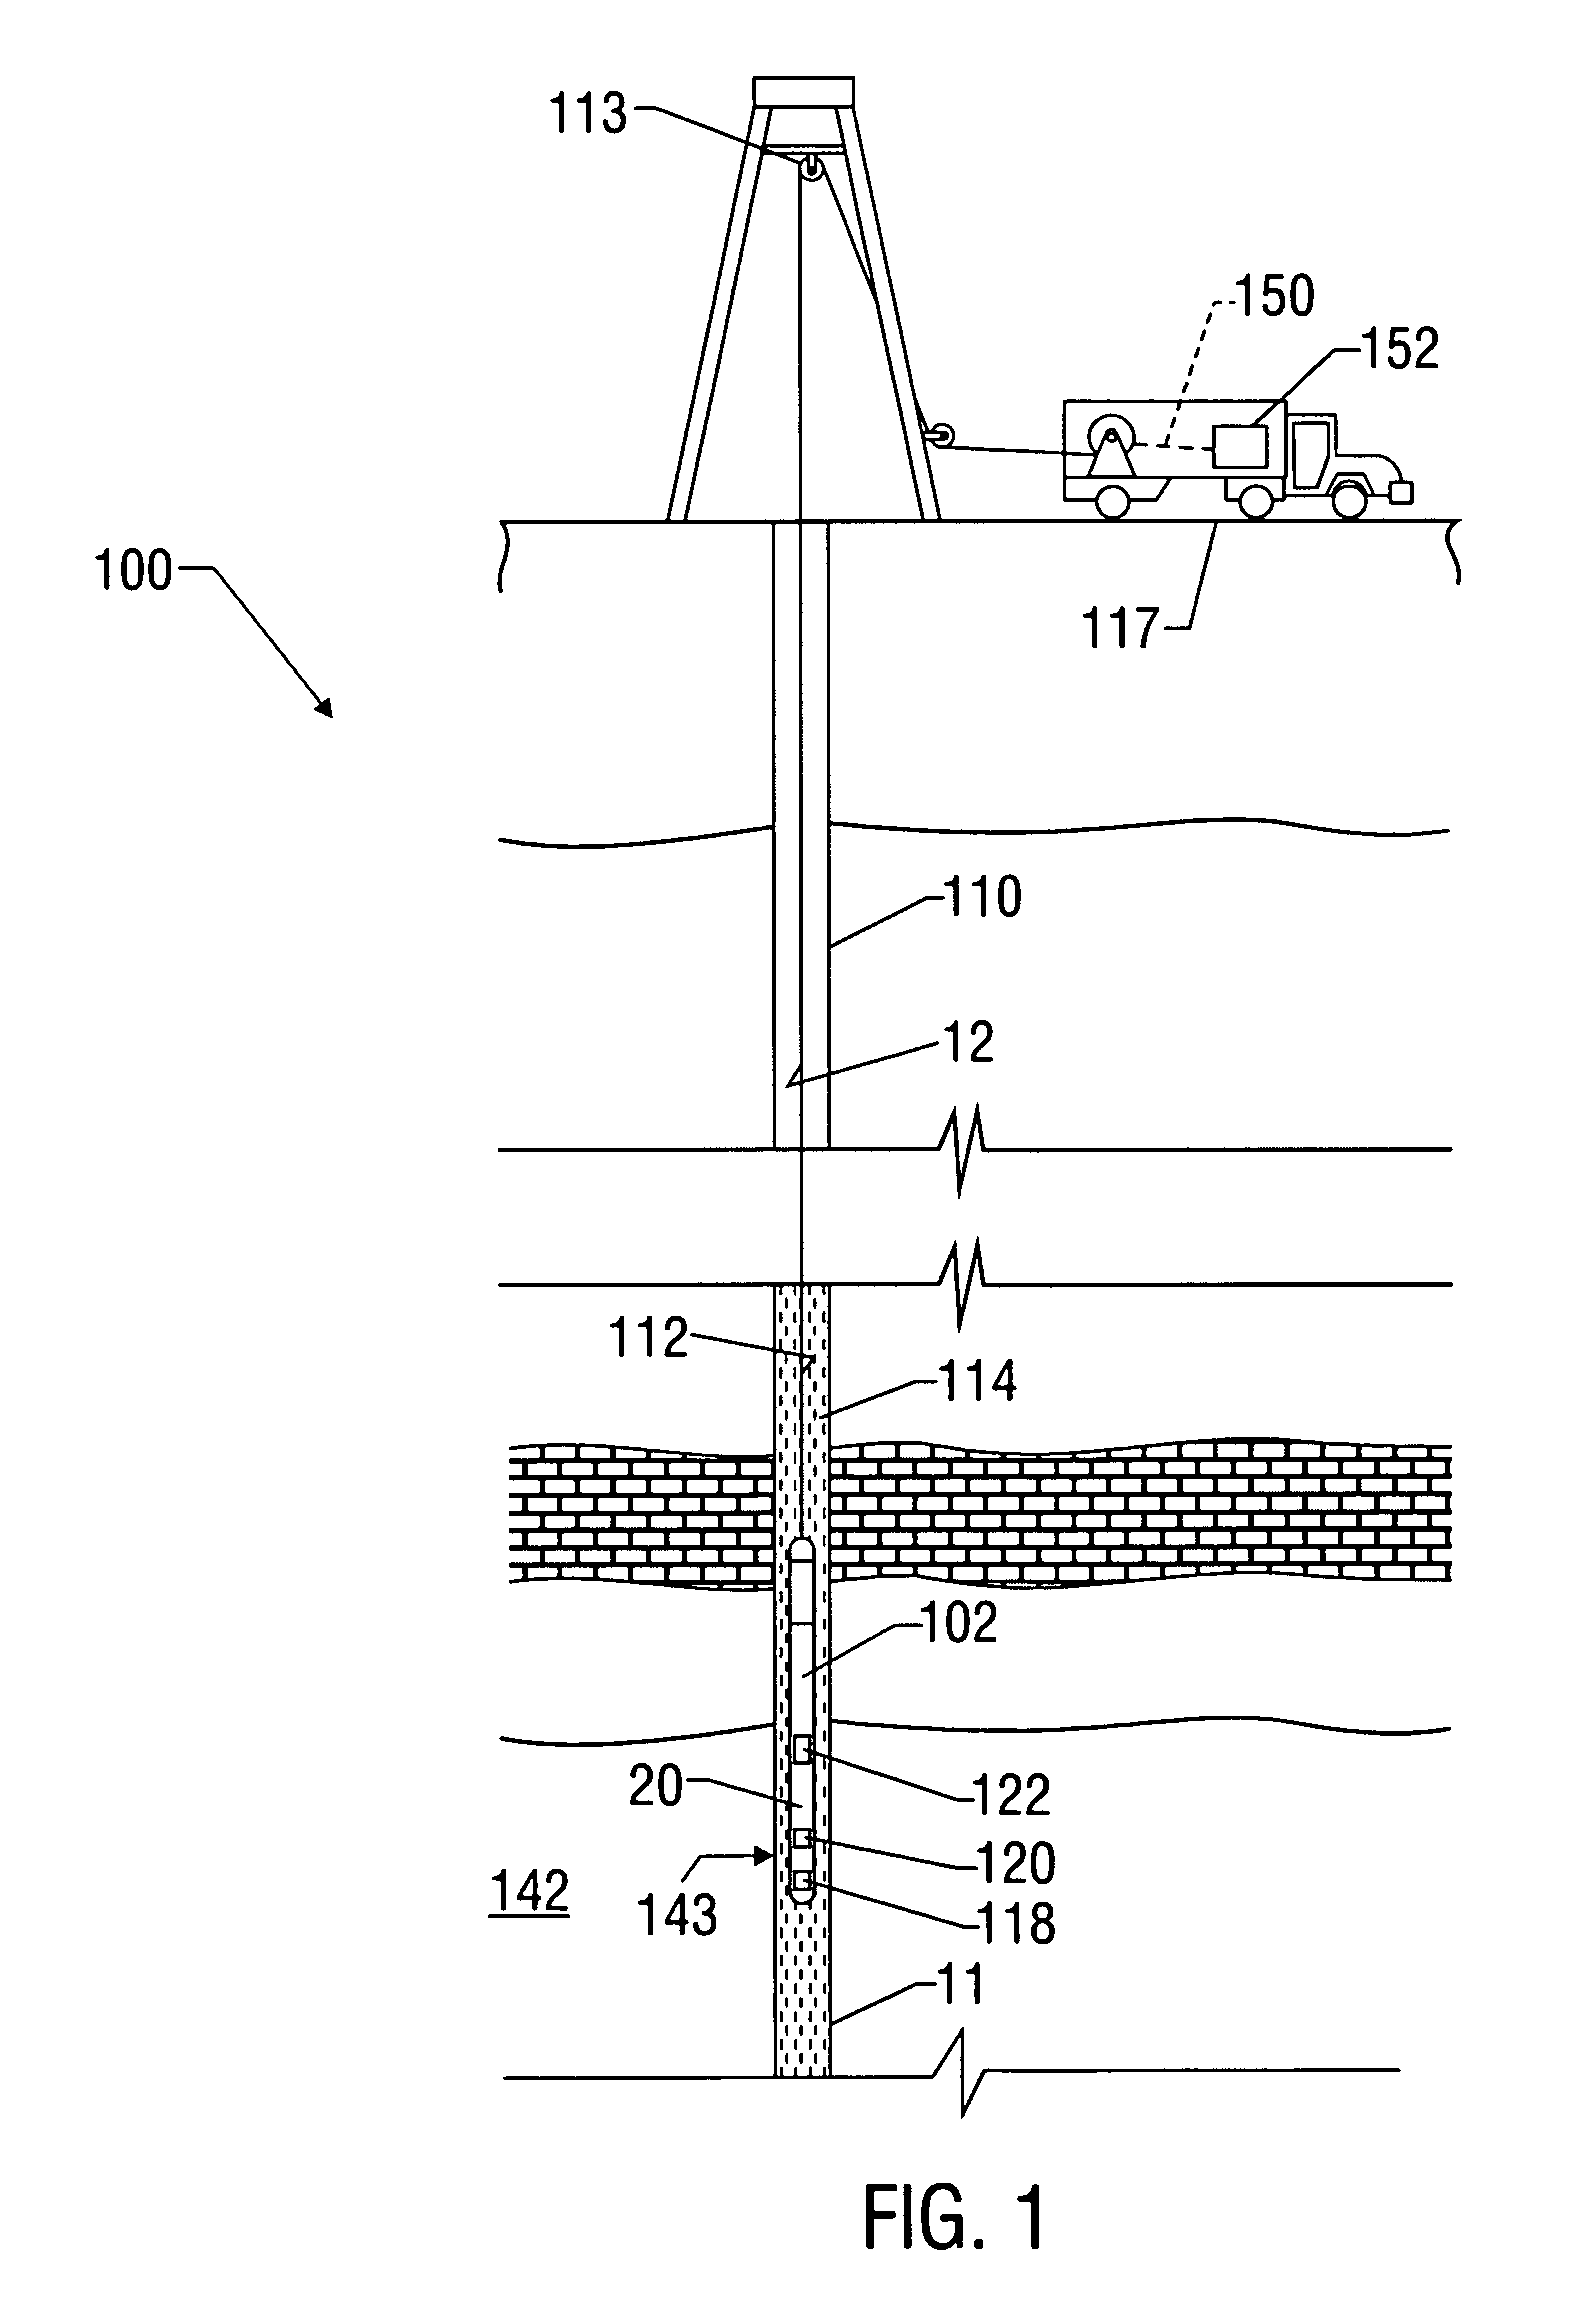 Apparatus and method for detecting fluid entering a wellbore